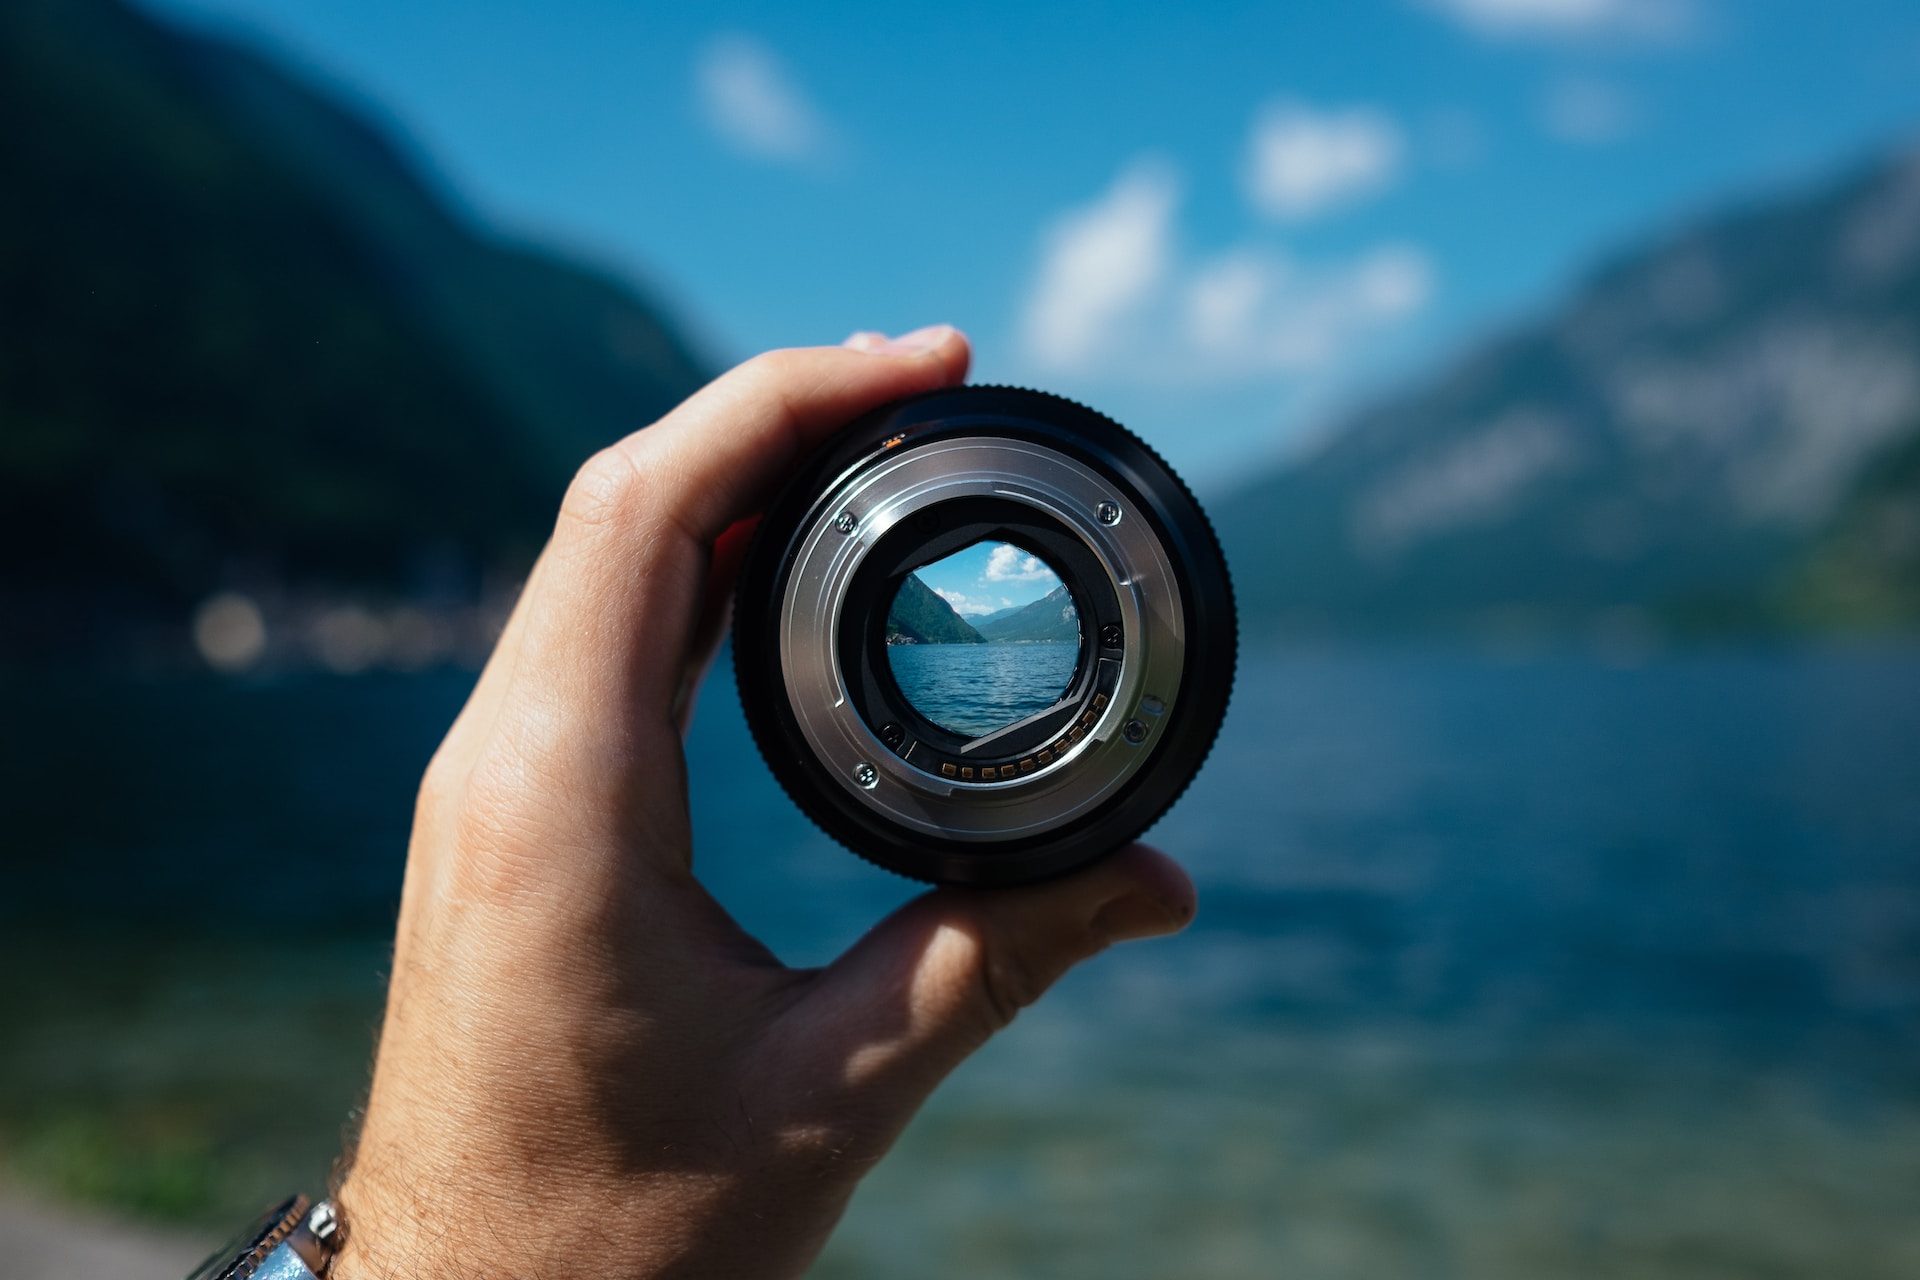 A hand holding a camera lens in front of a mountain lake scene.  The image outside of the lens is blurry; inside the lens, it is clear and focused.